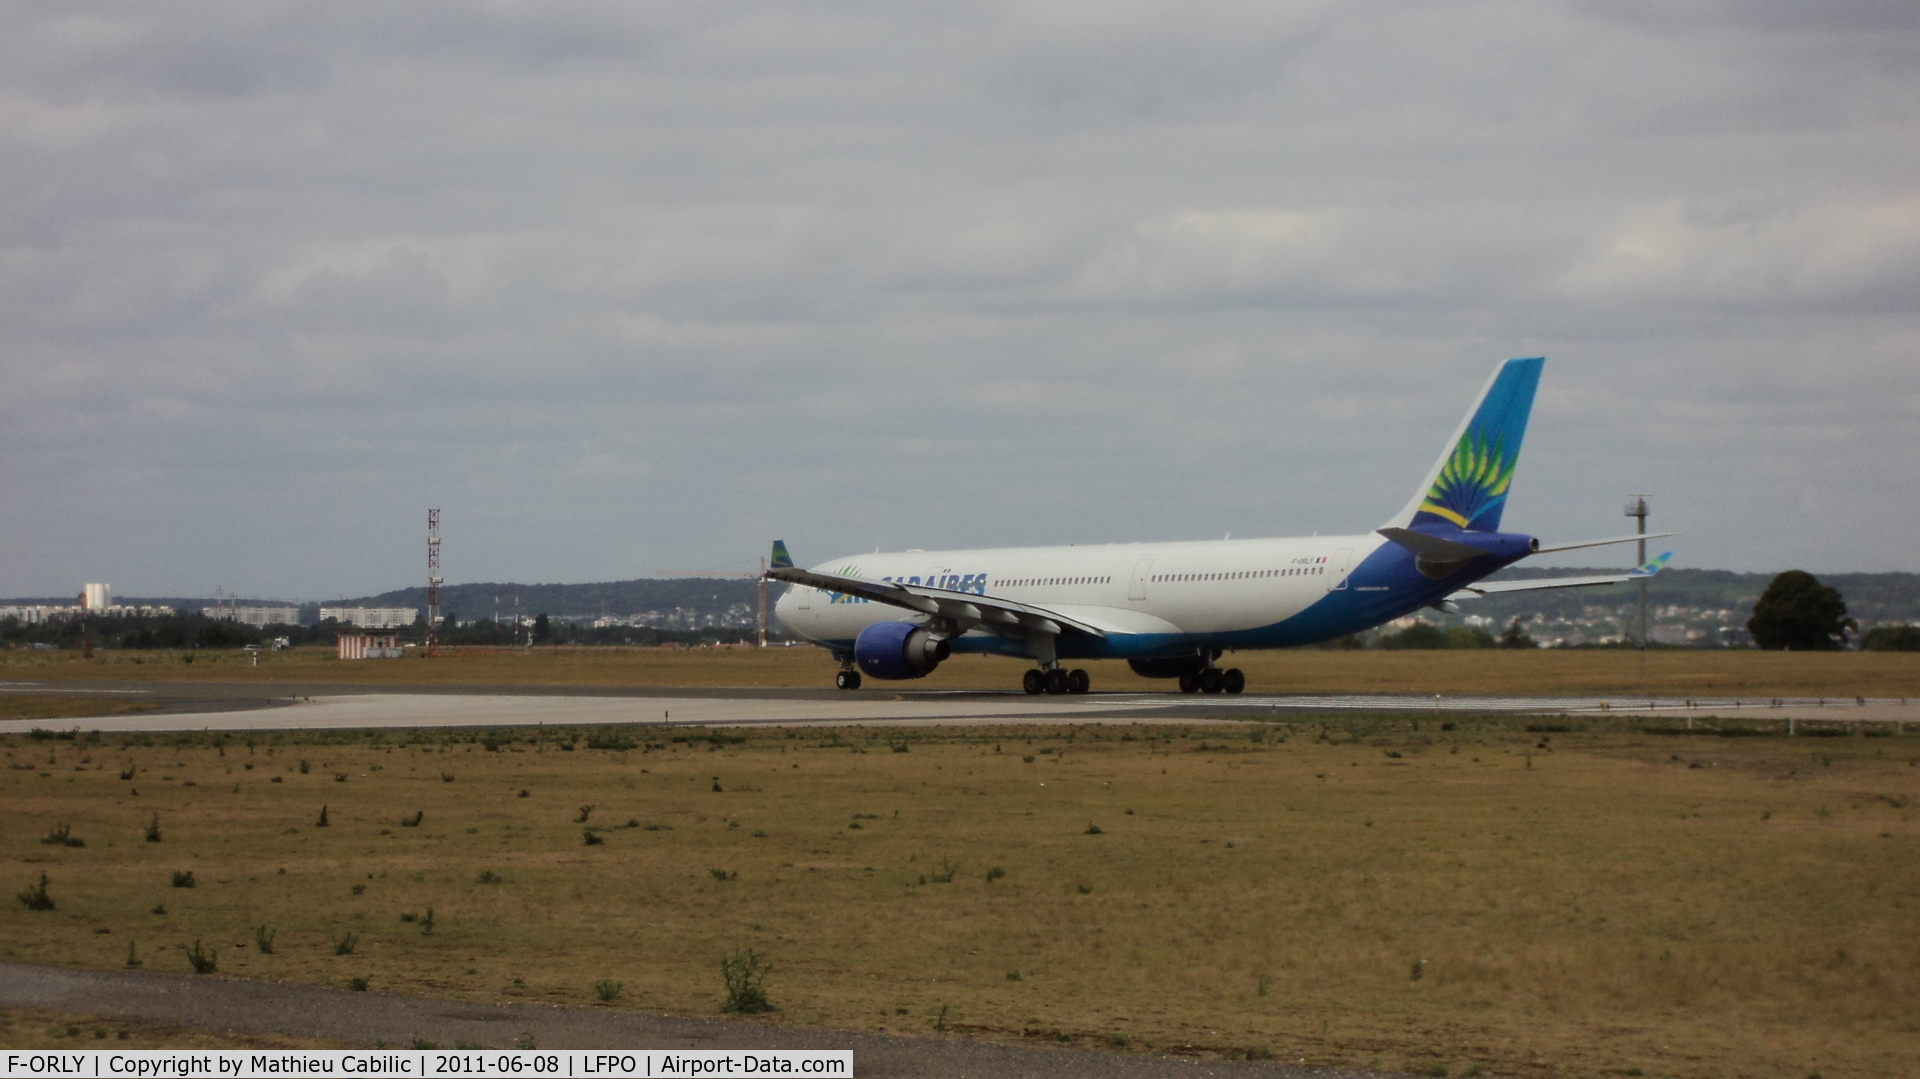 F-ORLY, 2006 Airbus A330-323X C/N 758, Airbus A330-323X take off runway 24